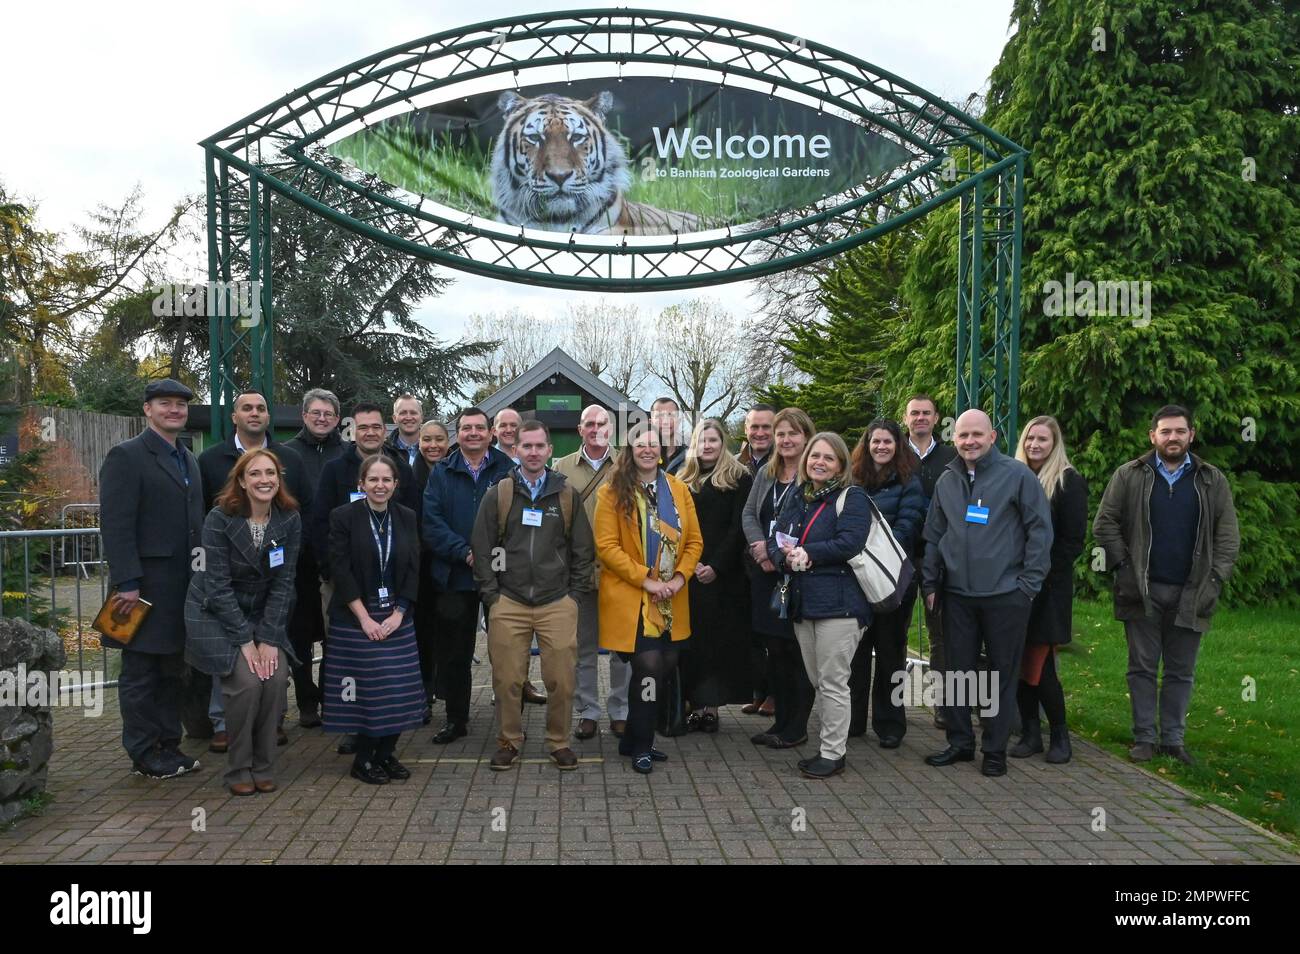 Members of Leadership Connect gather for a group photo at Banham Zoological Gardens in Norfolk, England, Nov. 18, 2022. Leadership Connect is a leadership development program that brings together community leaders from East Anglia with United States Air Force leaders from Royal Air Force Lakenheath, RAF Mildenhall, and RAF Alconbury to share experiences and expand leadership skills. Stock Photo